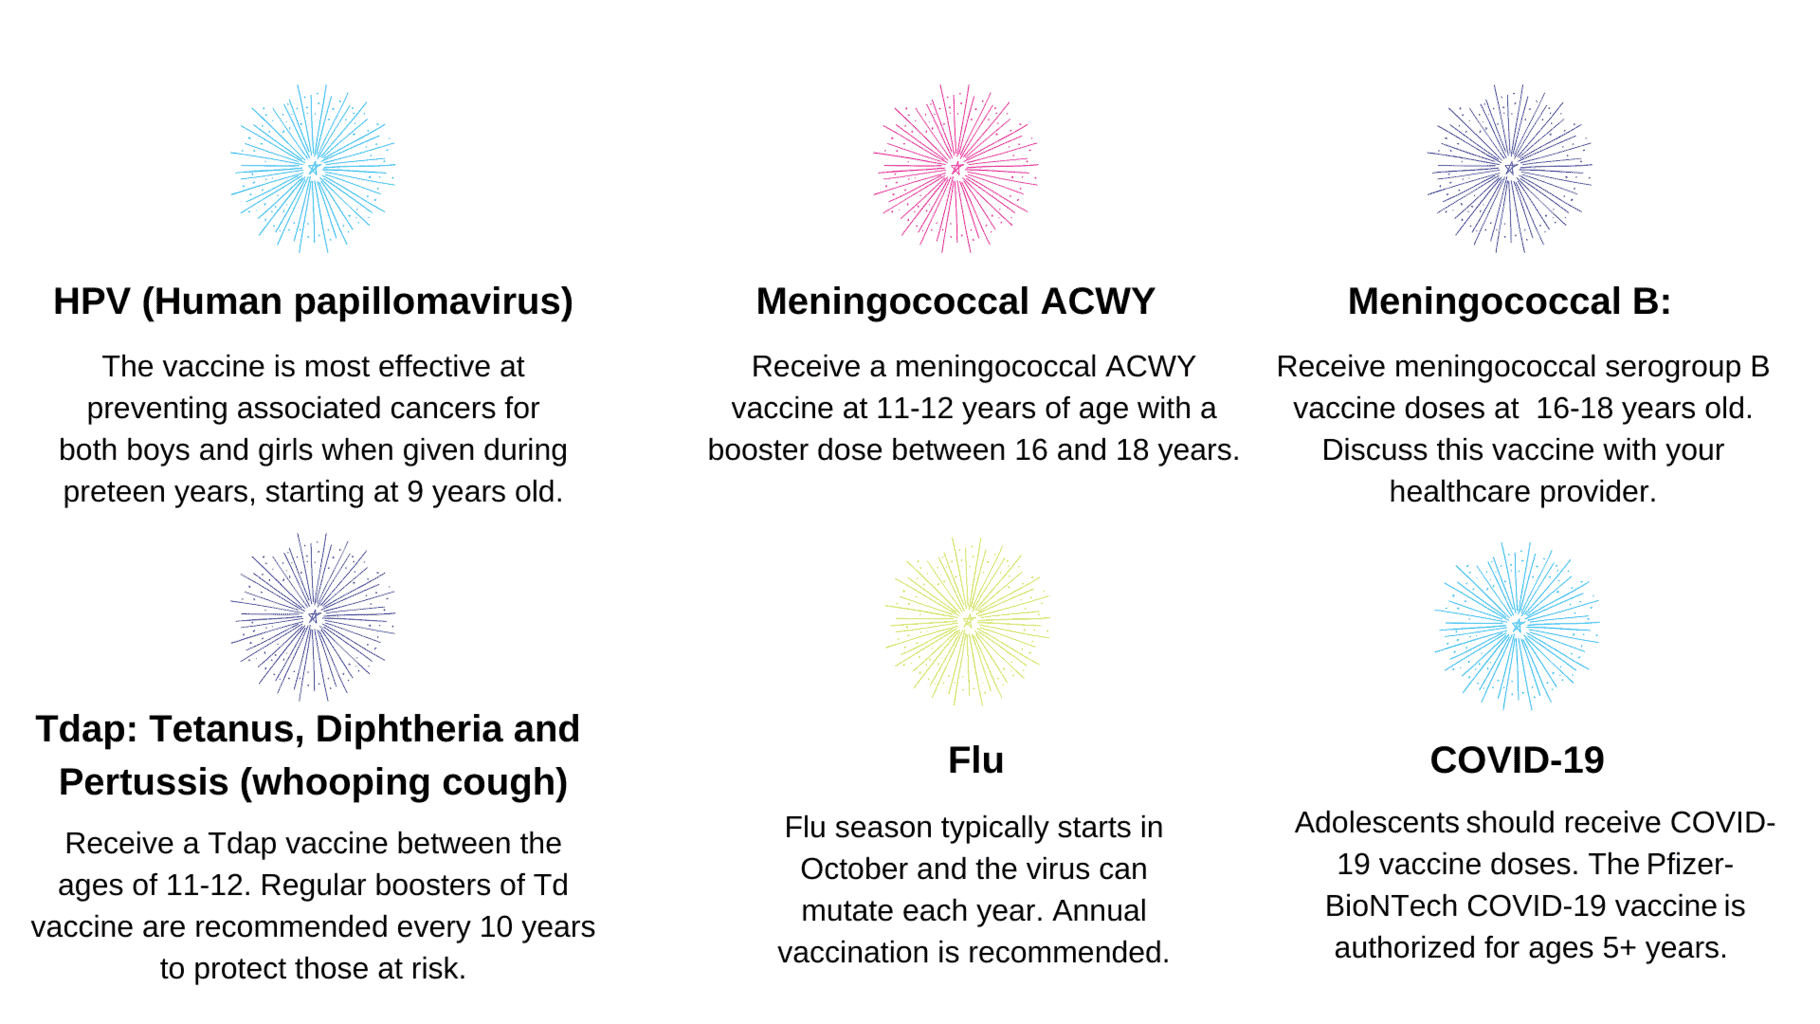 Recommended vaccines for adolescents and young adults